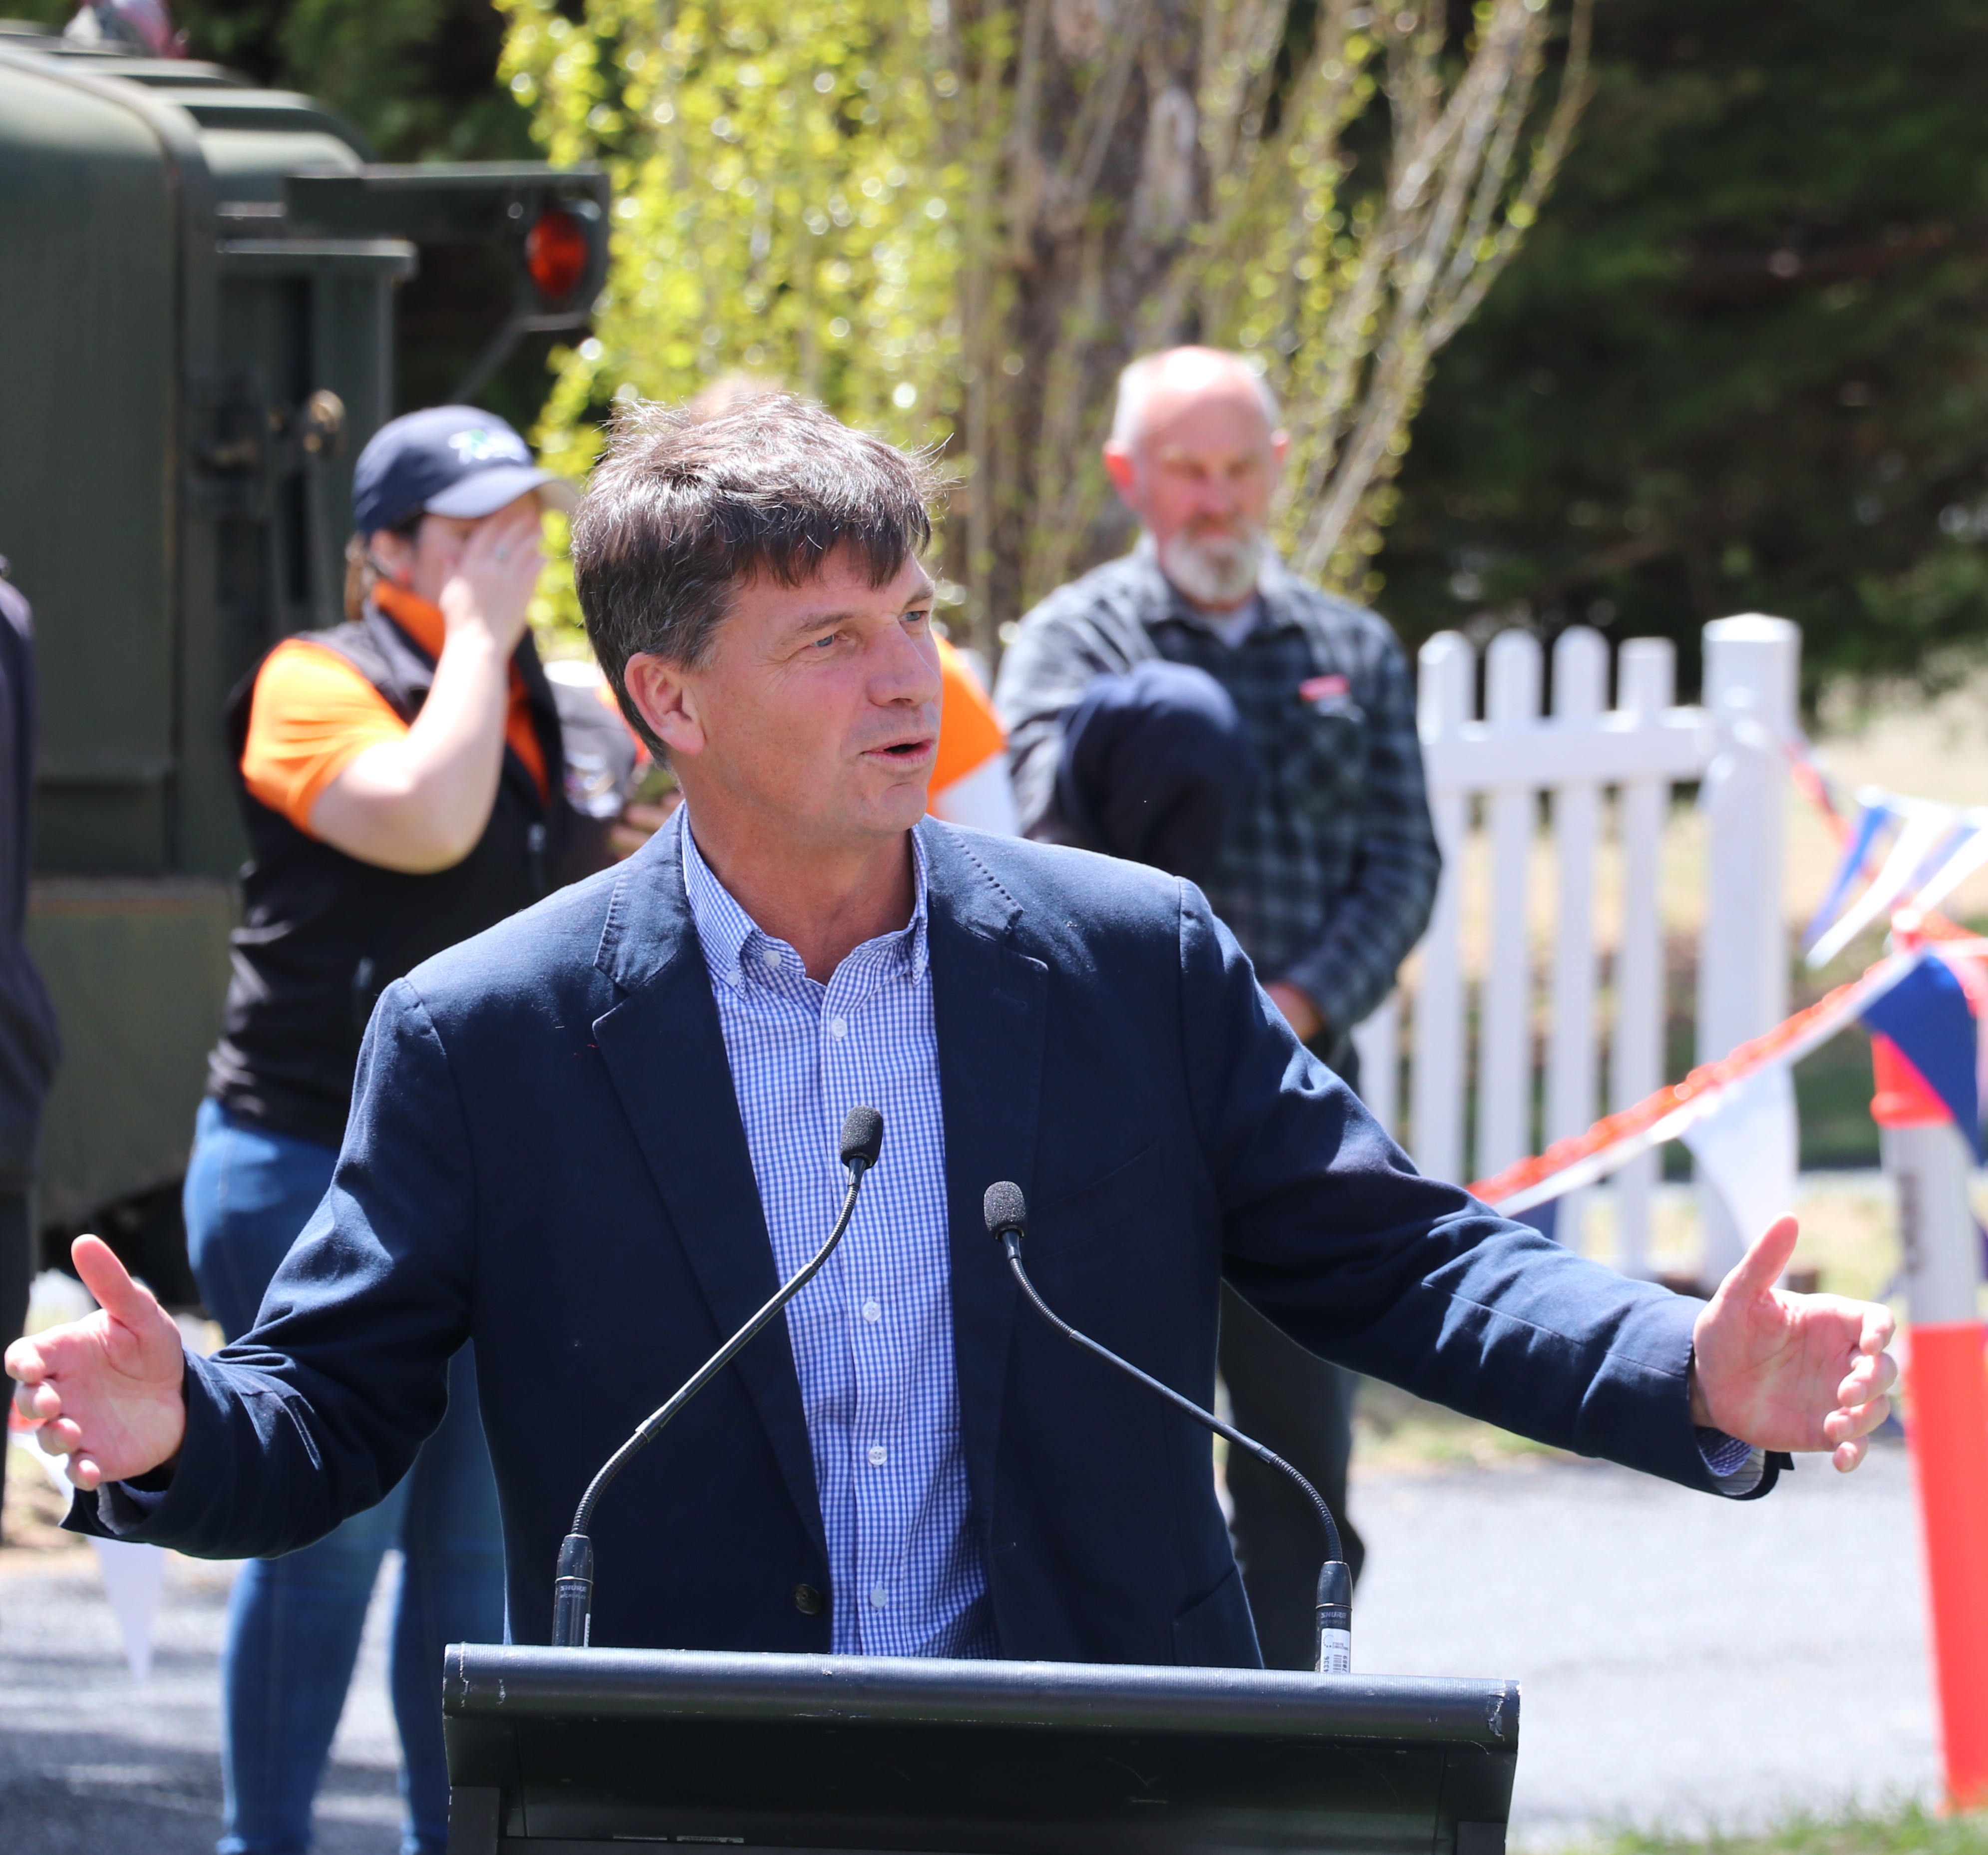 Campaign to oust Angus Taylor gains momentum